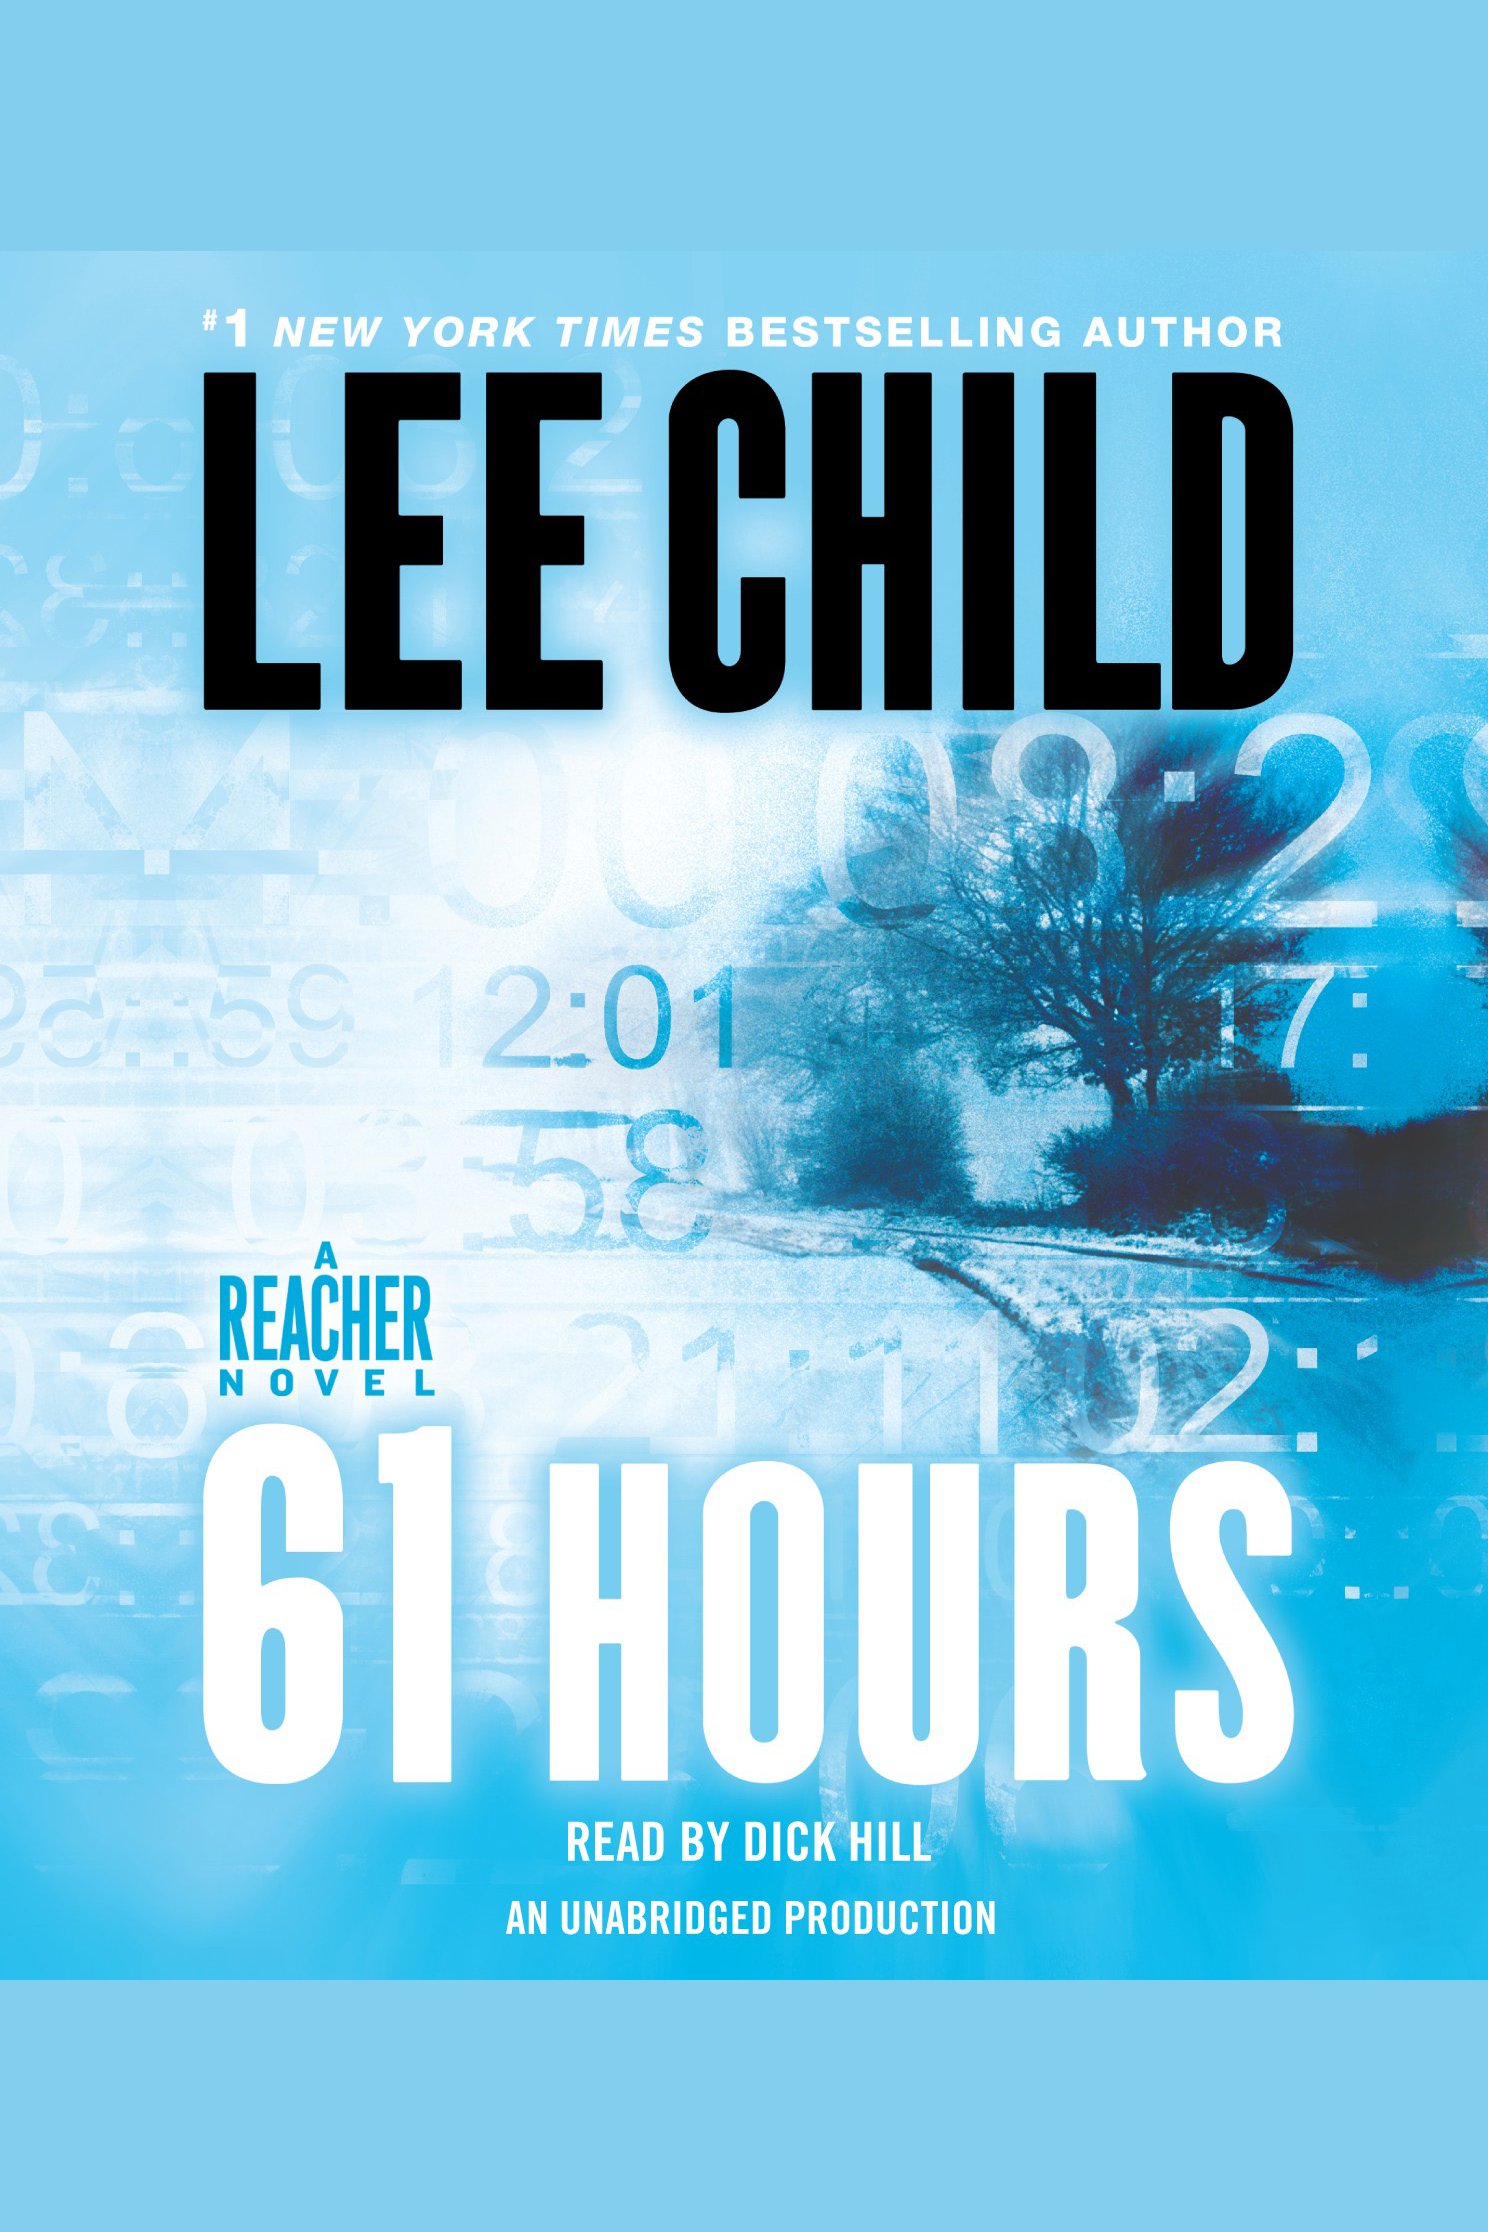 Cover image for 61 Hours [electronic resource] : A Jack Reacher Novel